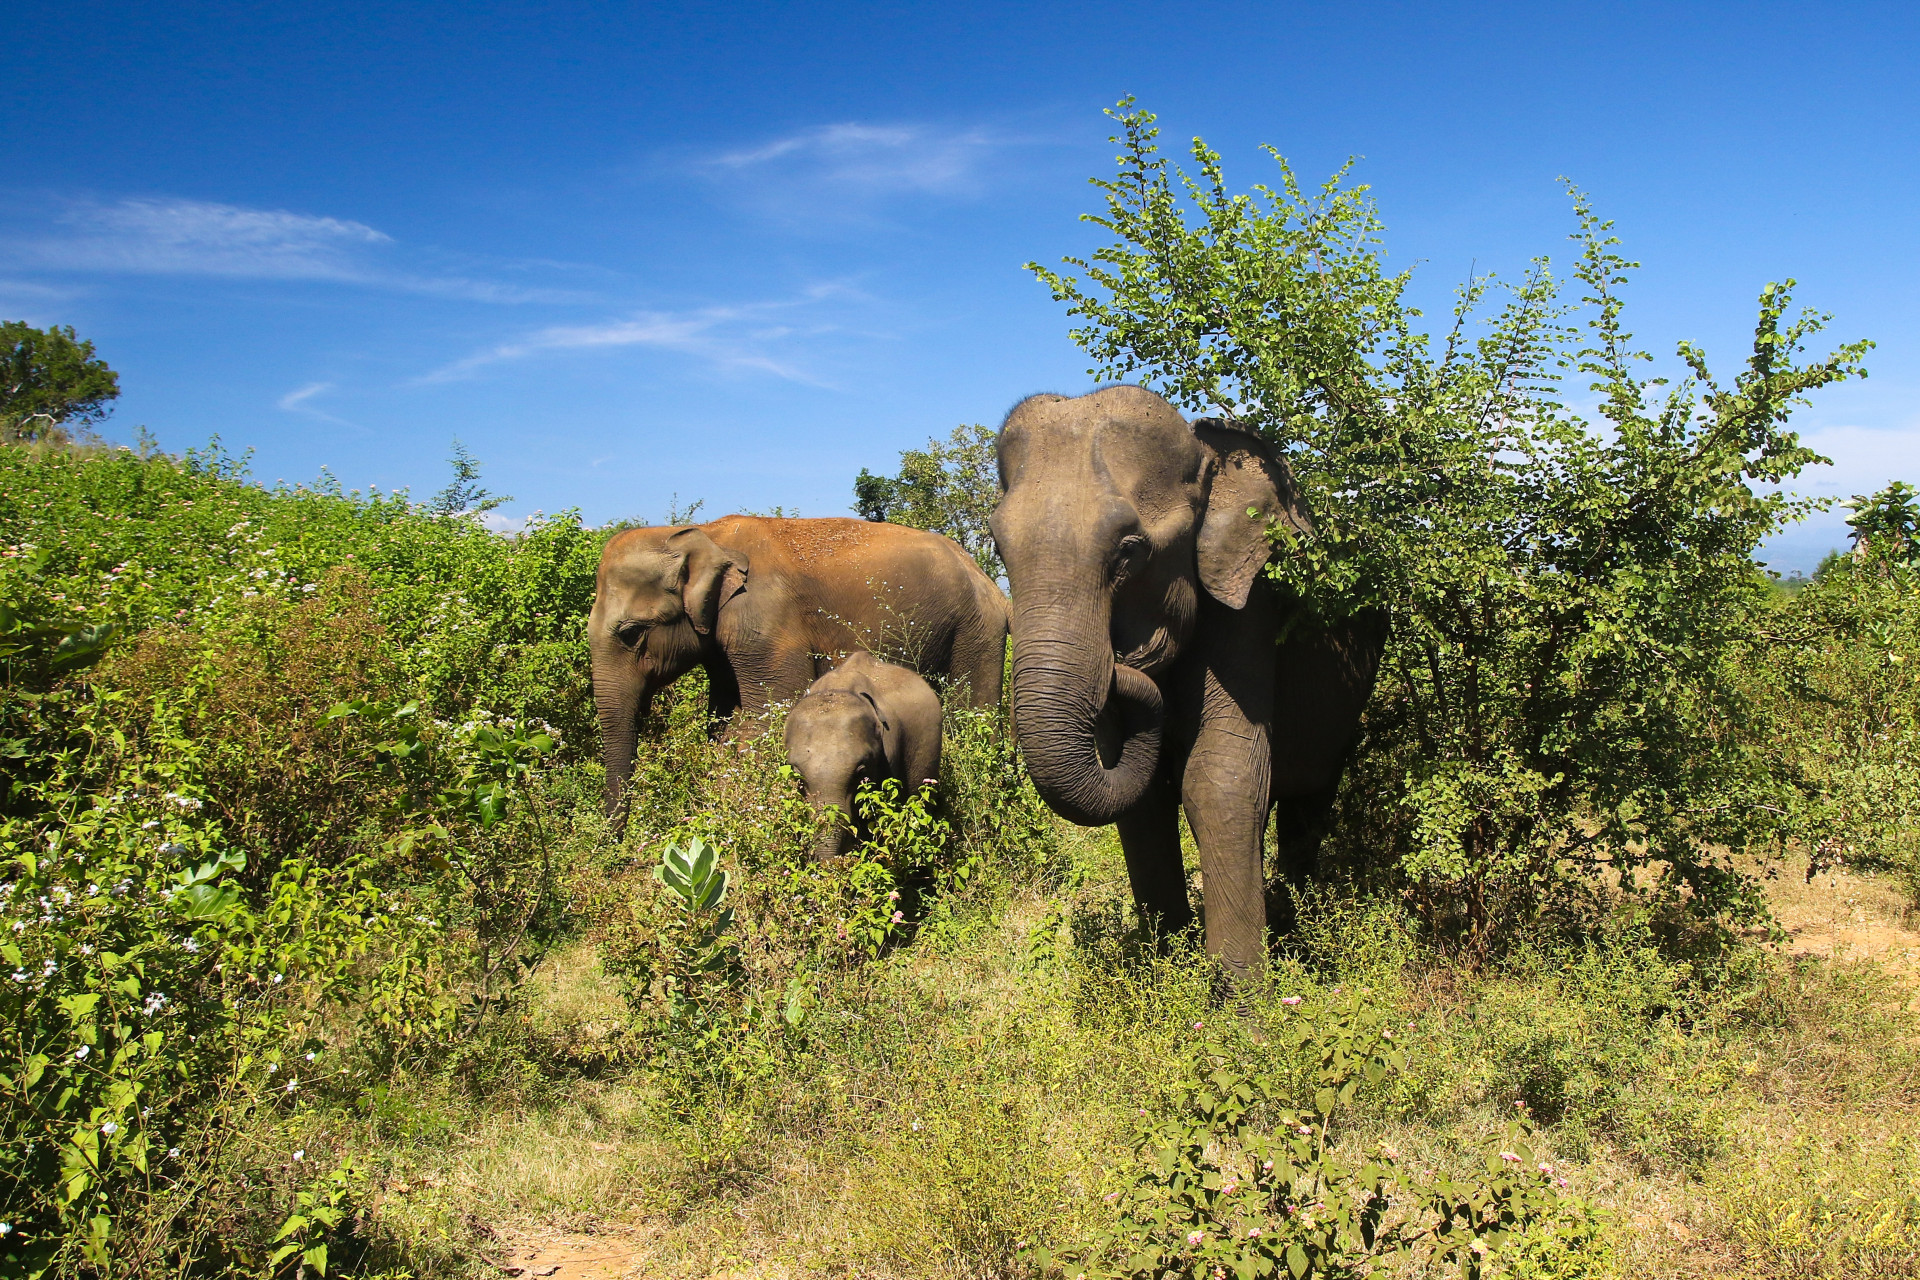 The park is one of the best places in the world to see wild elephants. <p><a href="https://www.msn.com/en-us/community/channel/vid-7xx8mnucu55yw63we9va2gwr7uihbxwc68fxqp25x6tg4ftibpra?cvid=94631541bc0f4f89bfd59158d696ad7e">Follow us and access great exclusive content every day</a></p>